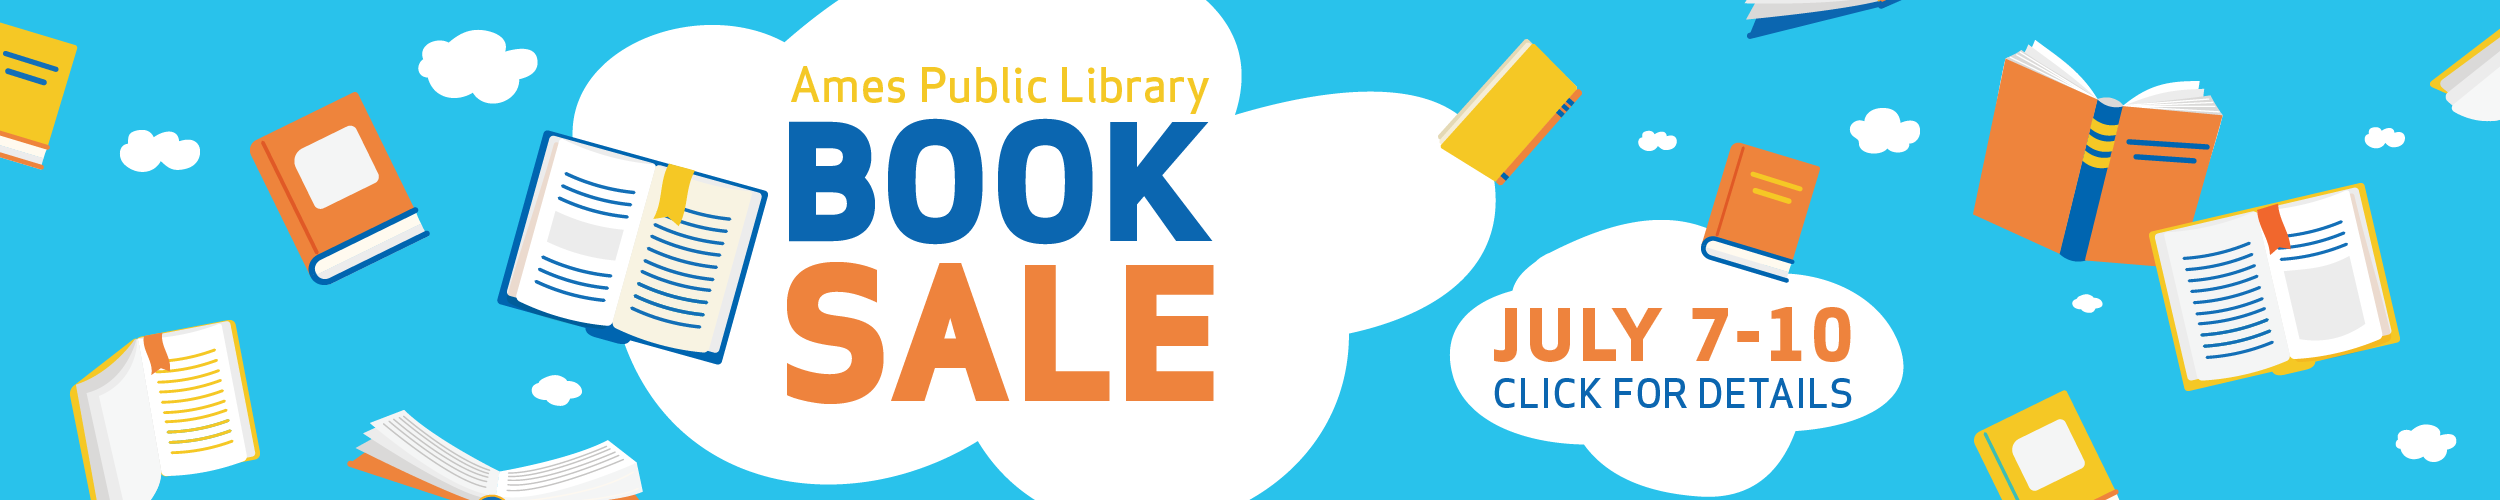 Ames Public Library Book Sale: July 7-10. Click for details.